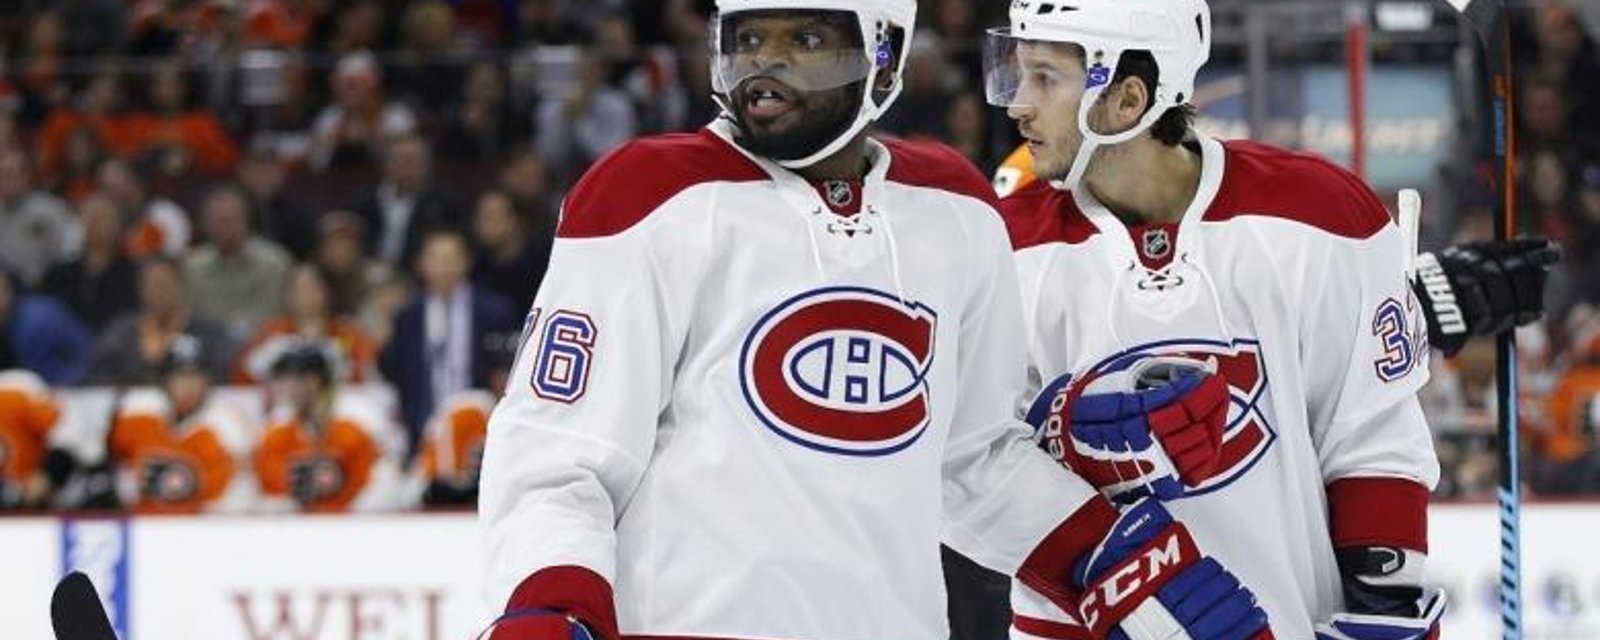 Head coach puts all the blame for latest loss on P.K. Subban.